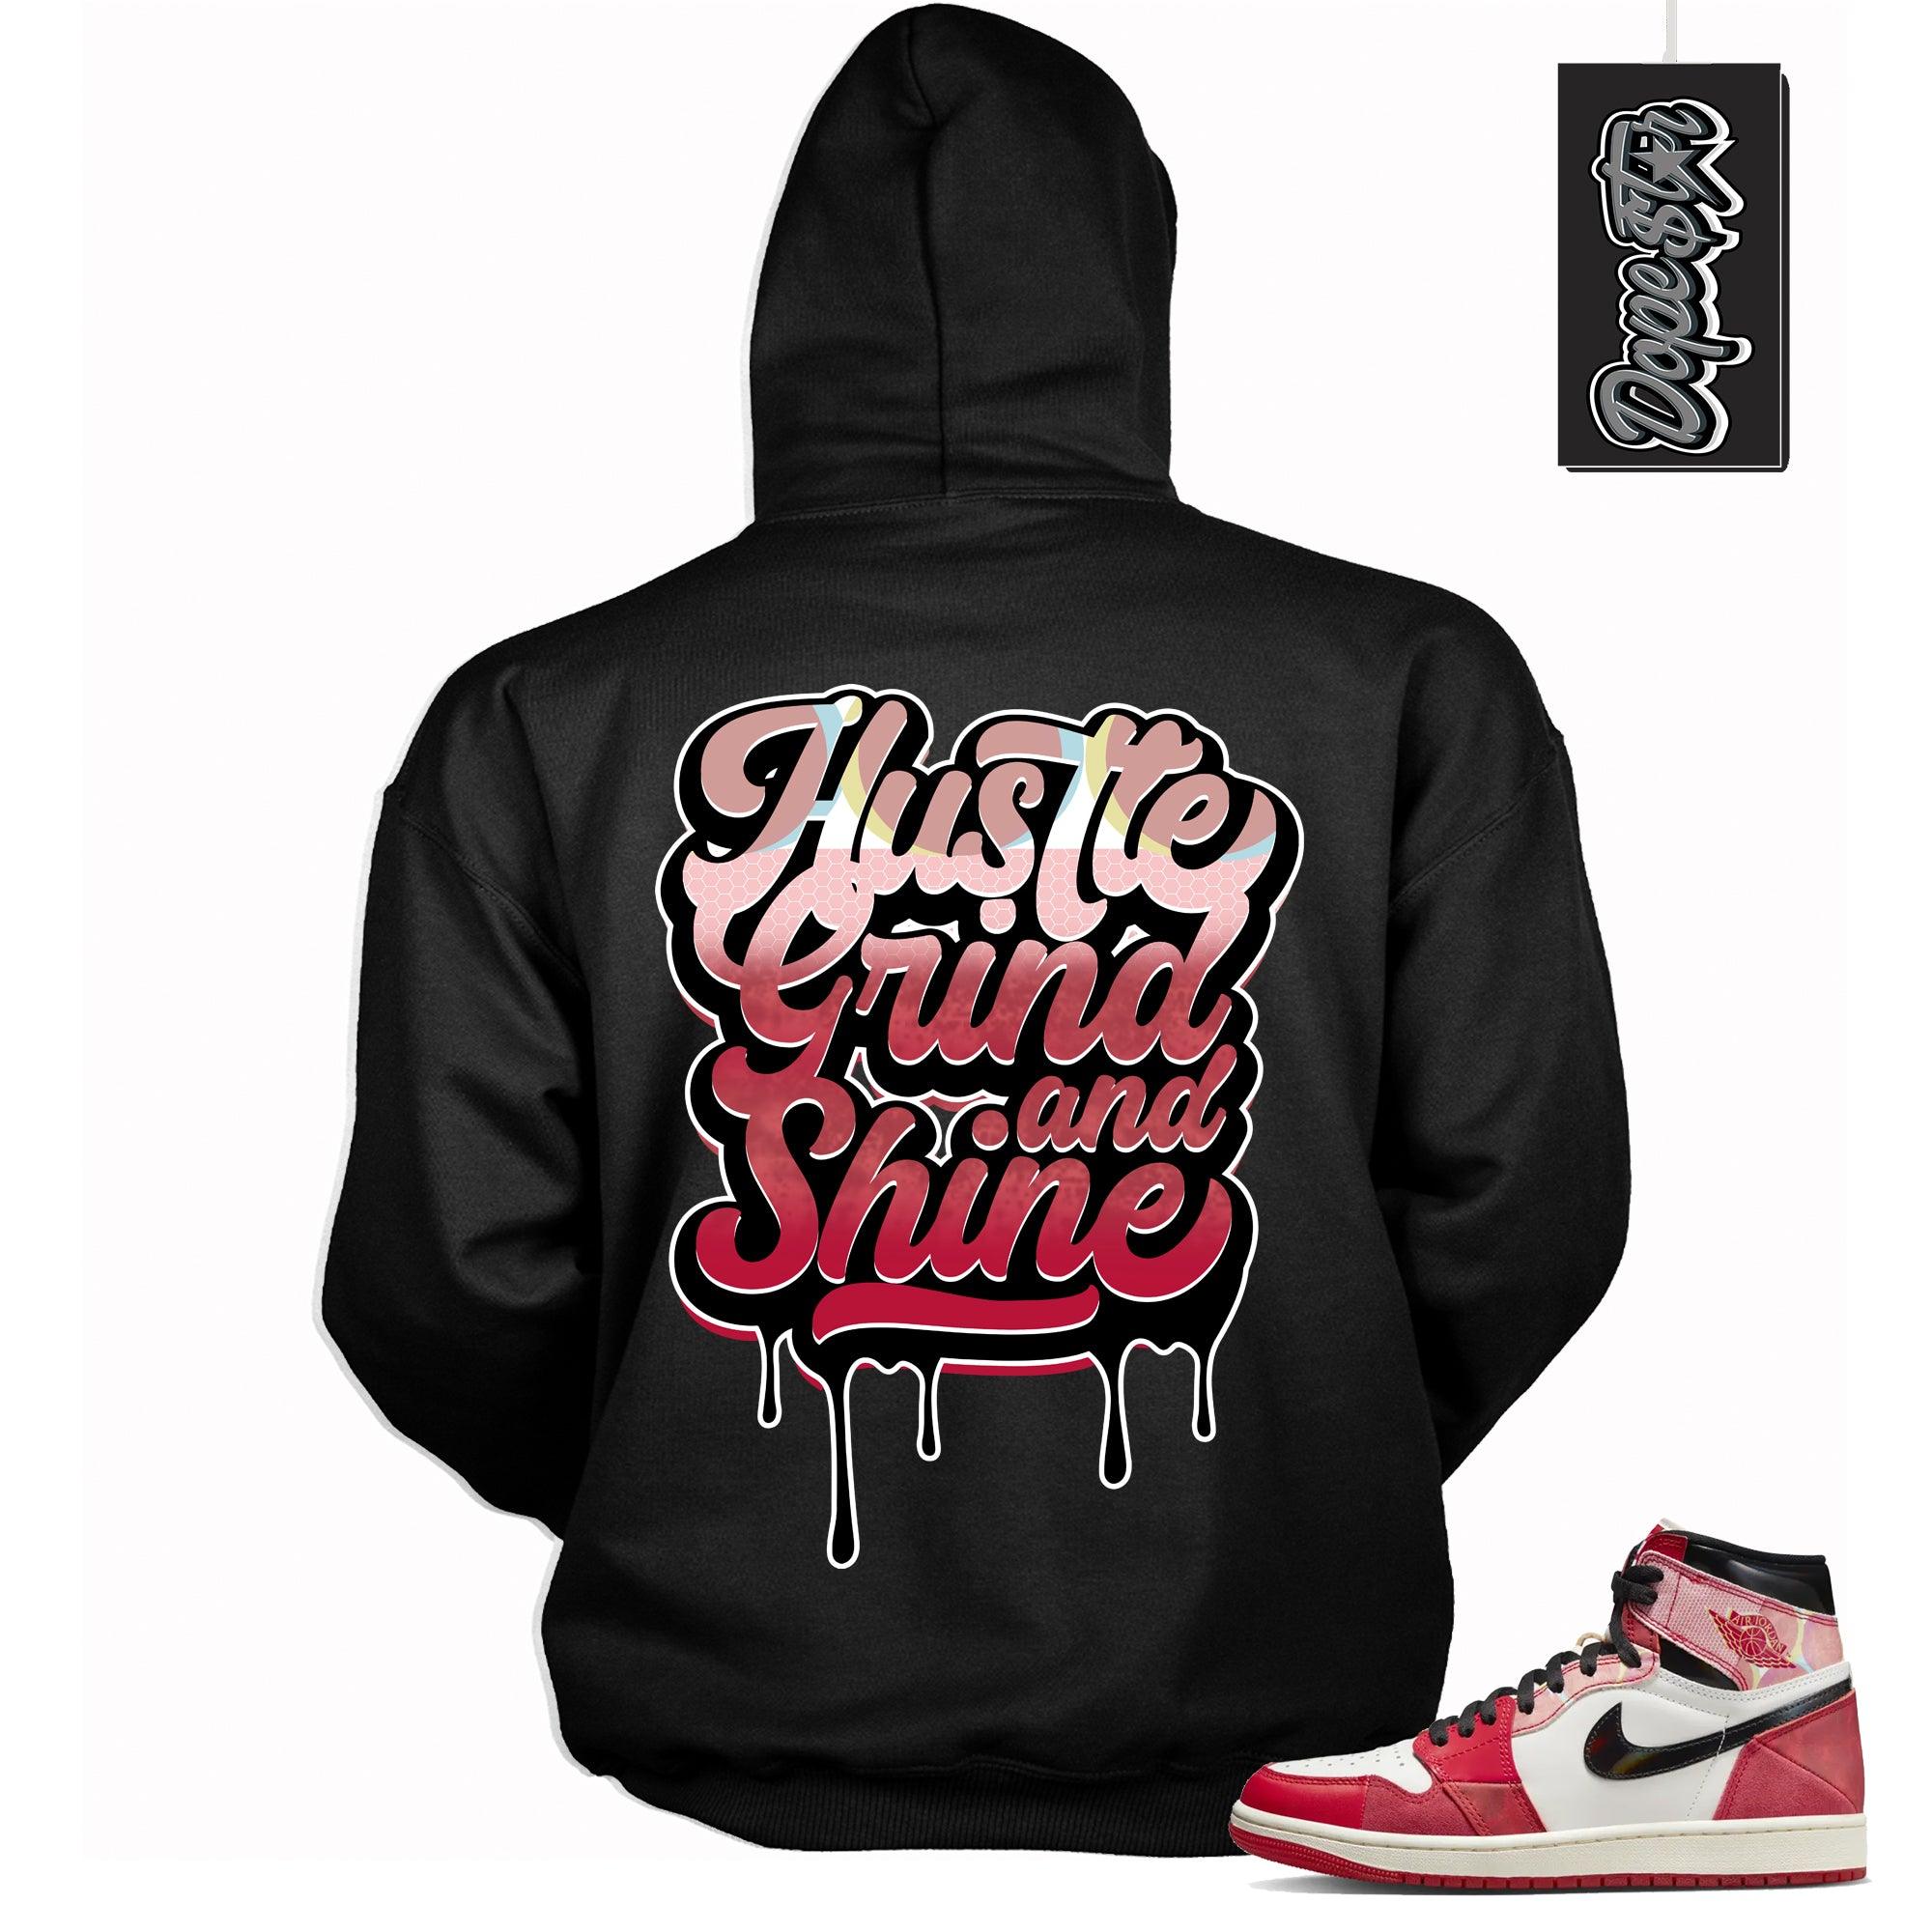 Cool Black Graphic Hoodie with “ Hustle Grind And Shine “ print, that perfectly matches AIR JORDAN 1 Retro High OG NEXT CHAPTER SPIDER-VERSE sneakers